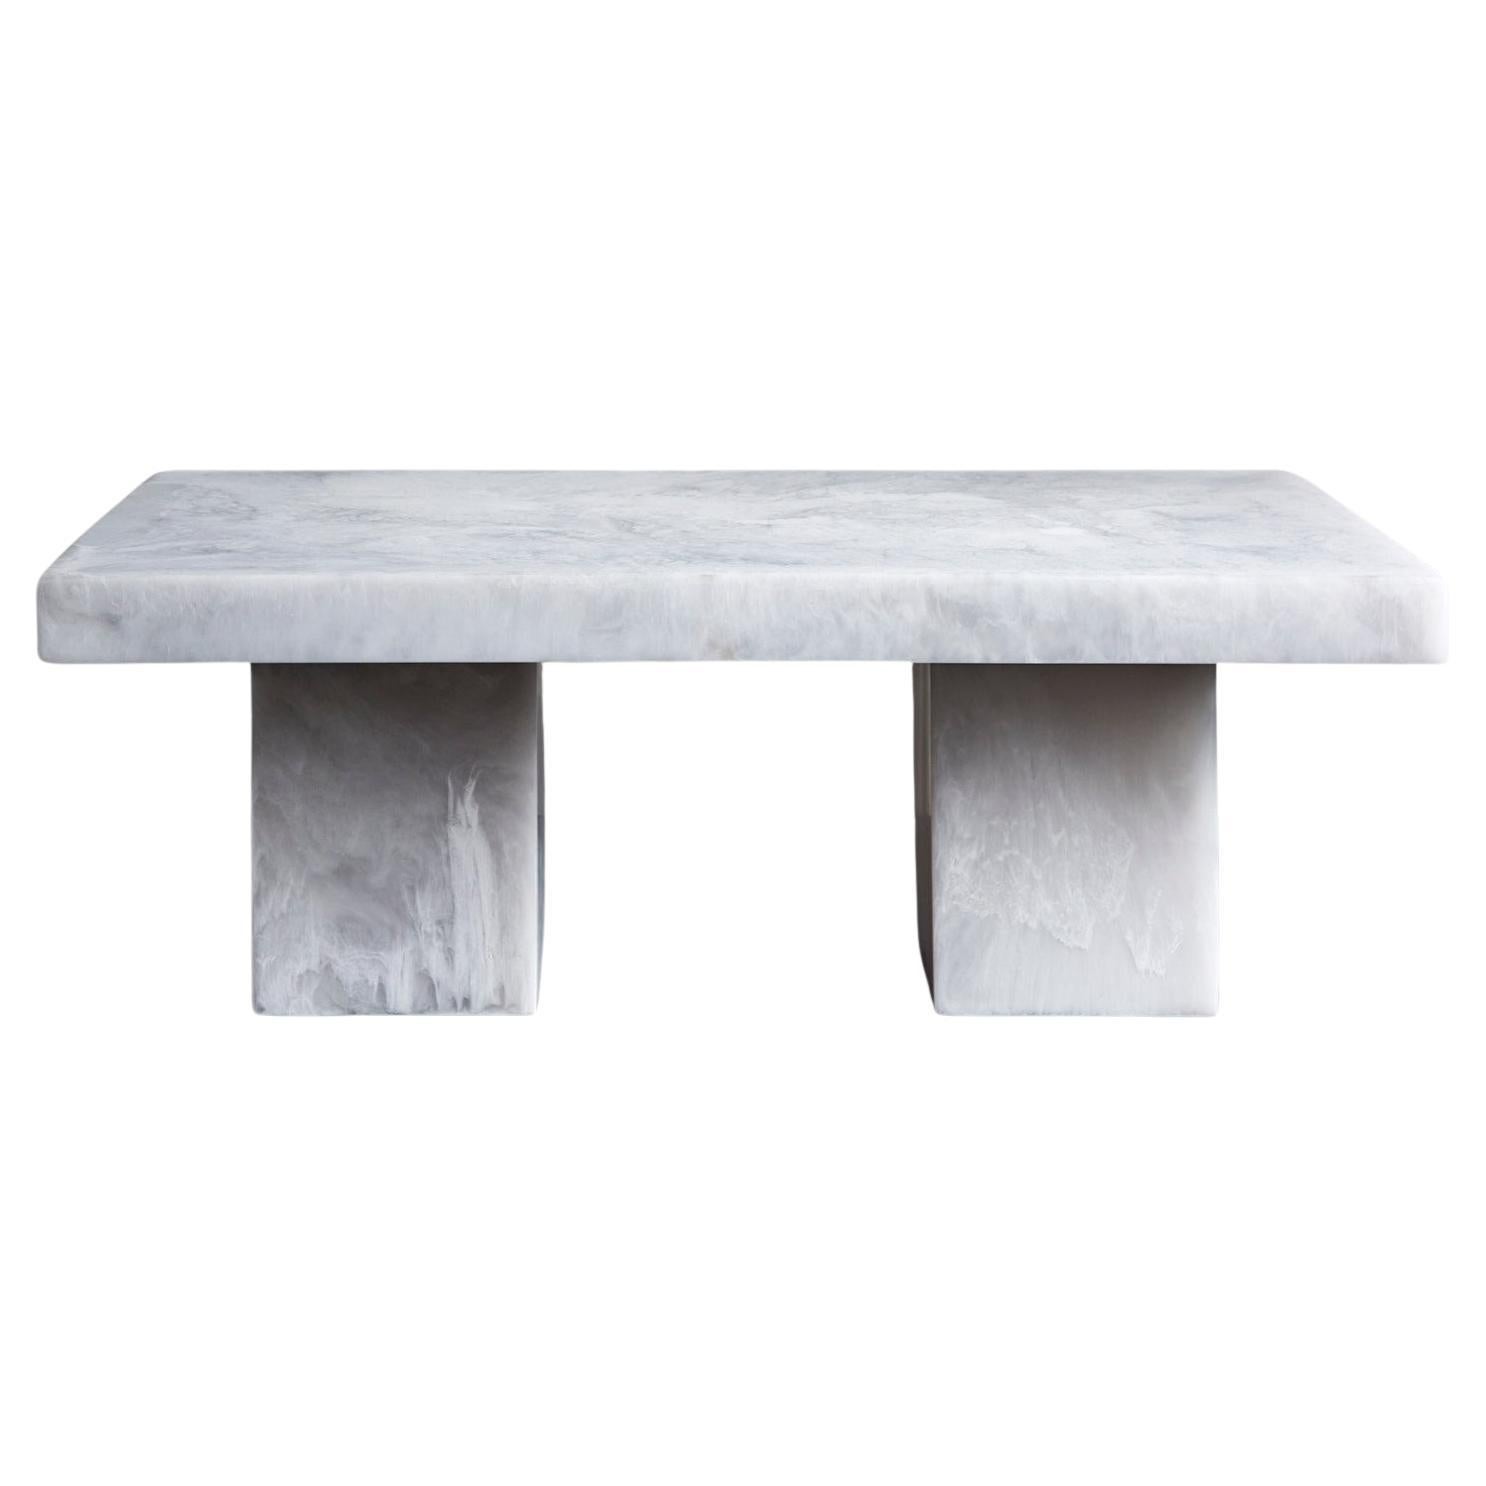 Studio Sturdy Lions Coffee Table – White Marble Resin For Sale